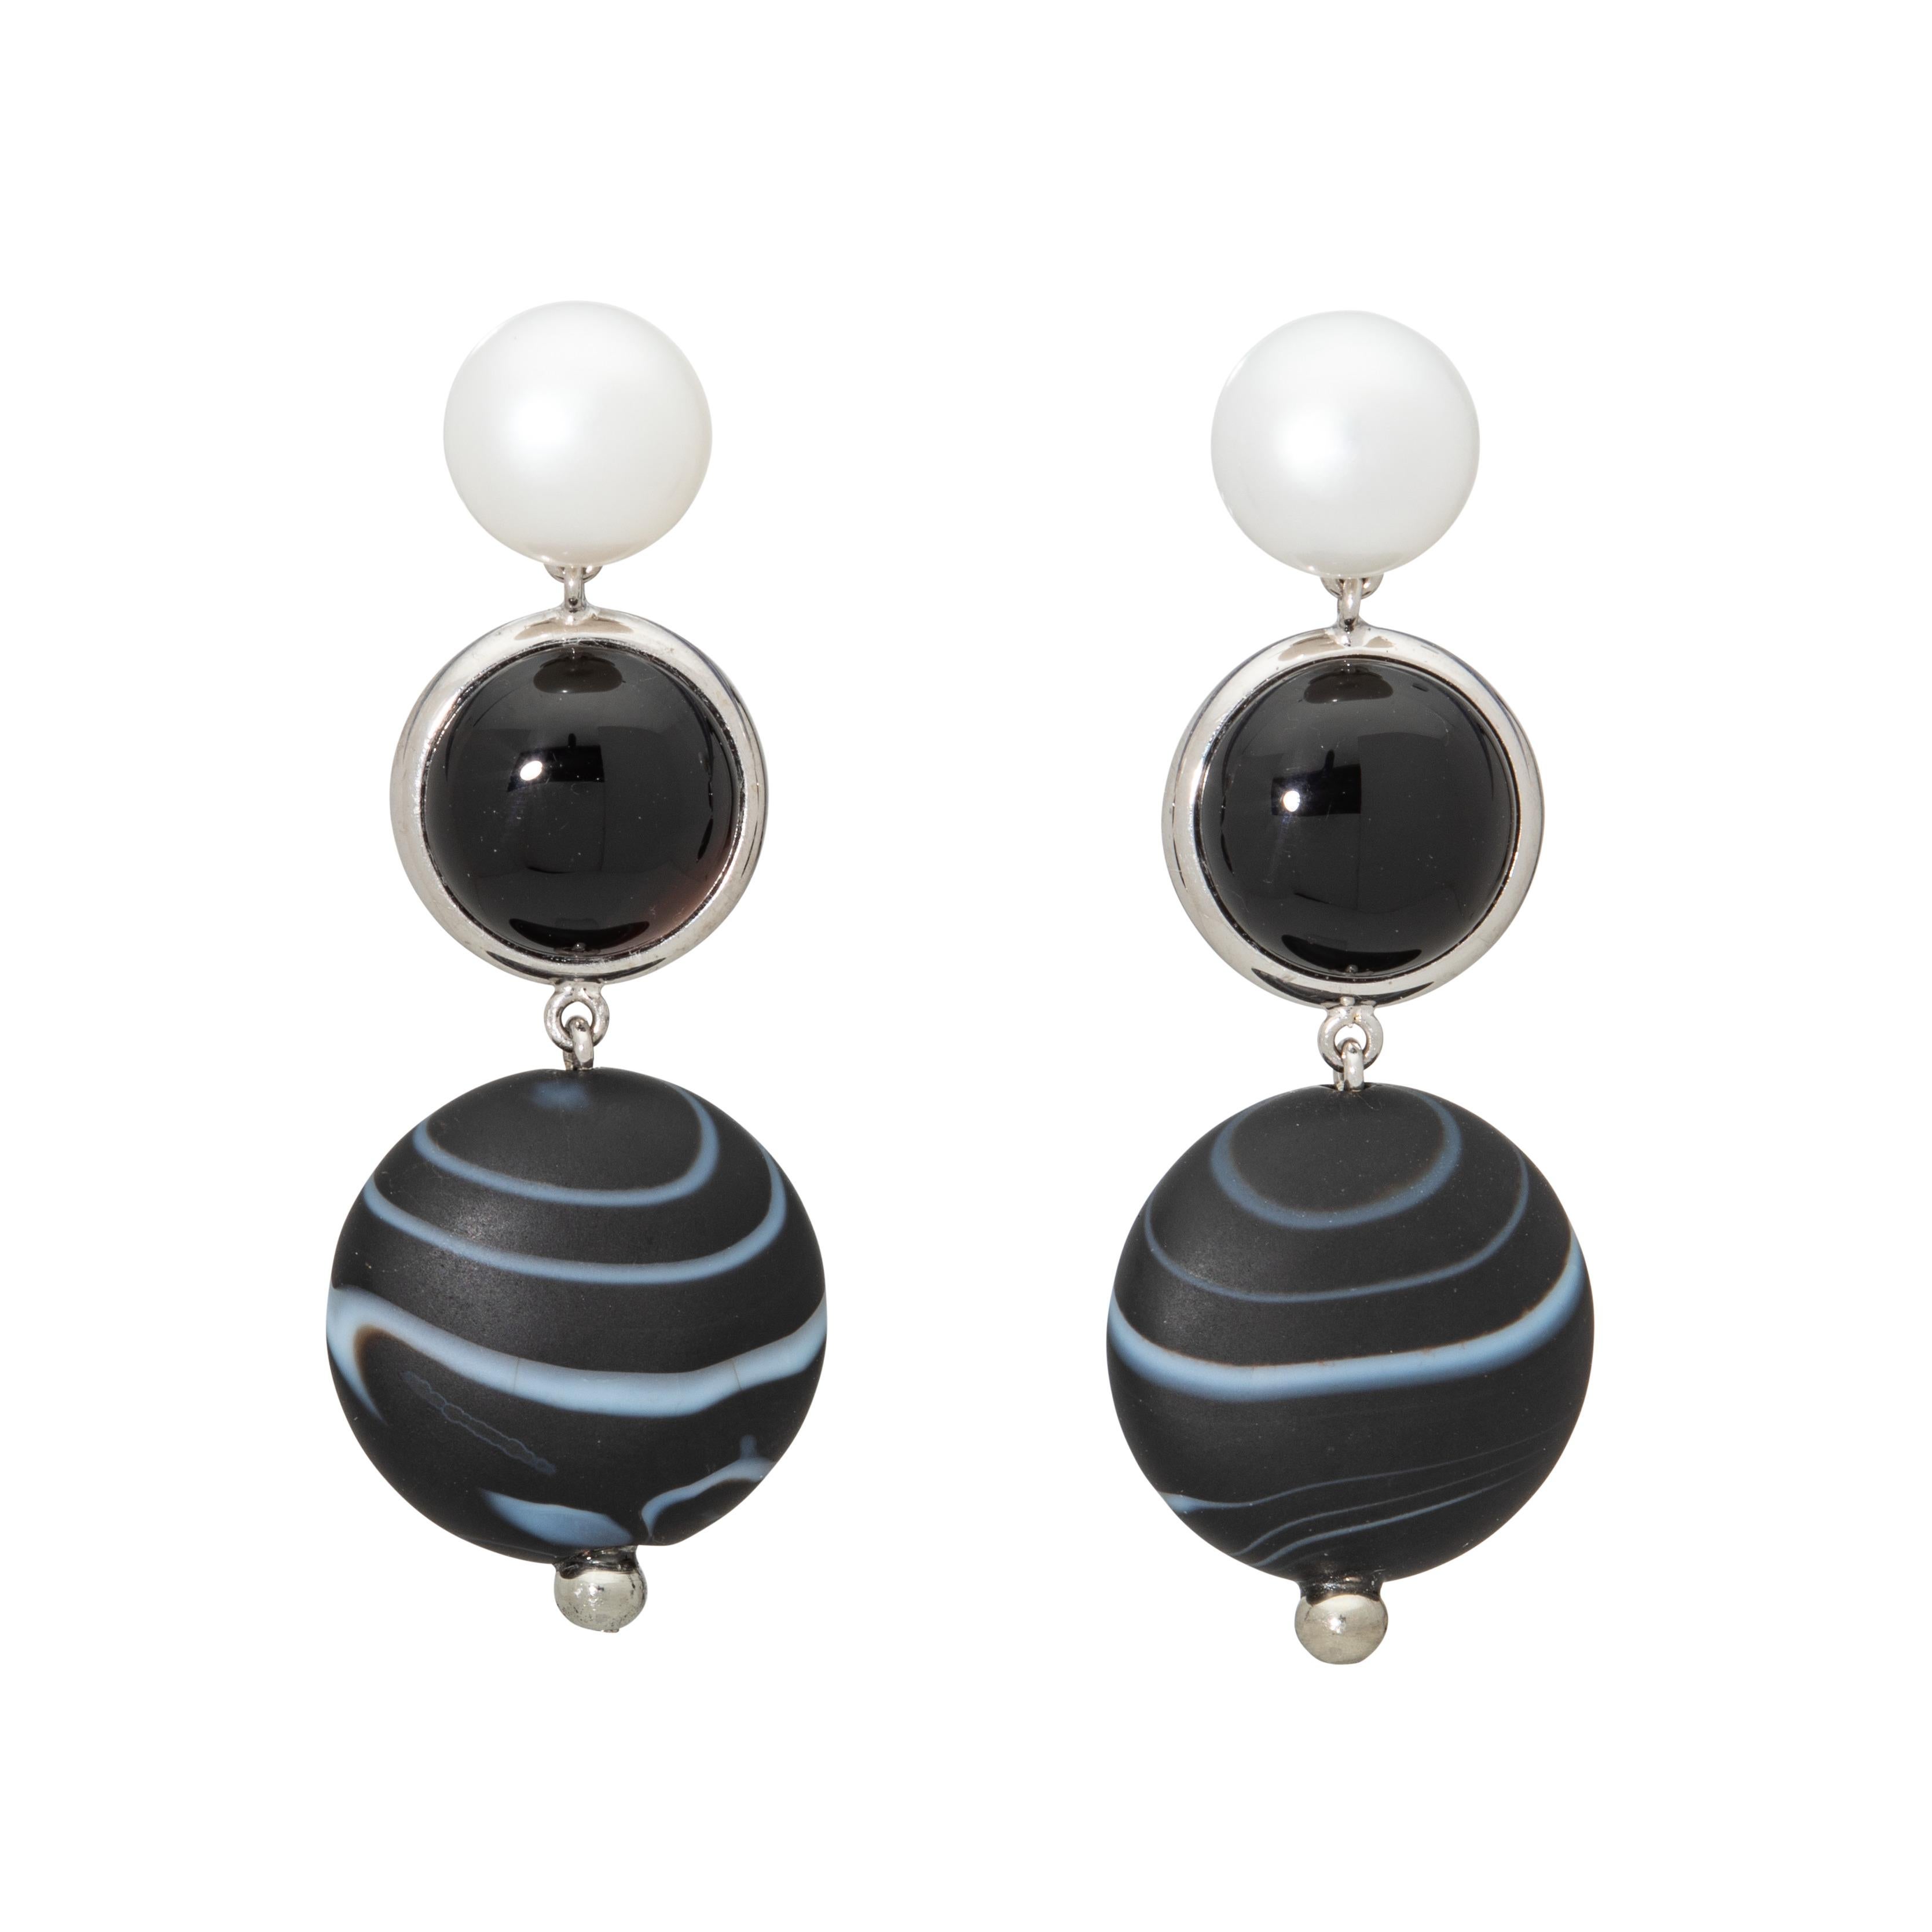 Looking at these earrings will take you away to the farthest reaches of the Cosmos, where darkness and light are juxtaposed in beautiful synchronicity. The shiny white pearl that adorns the top, followed by the deep, dark onyx, giving way to the